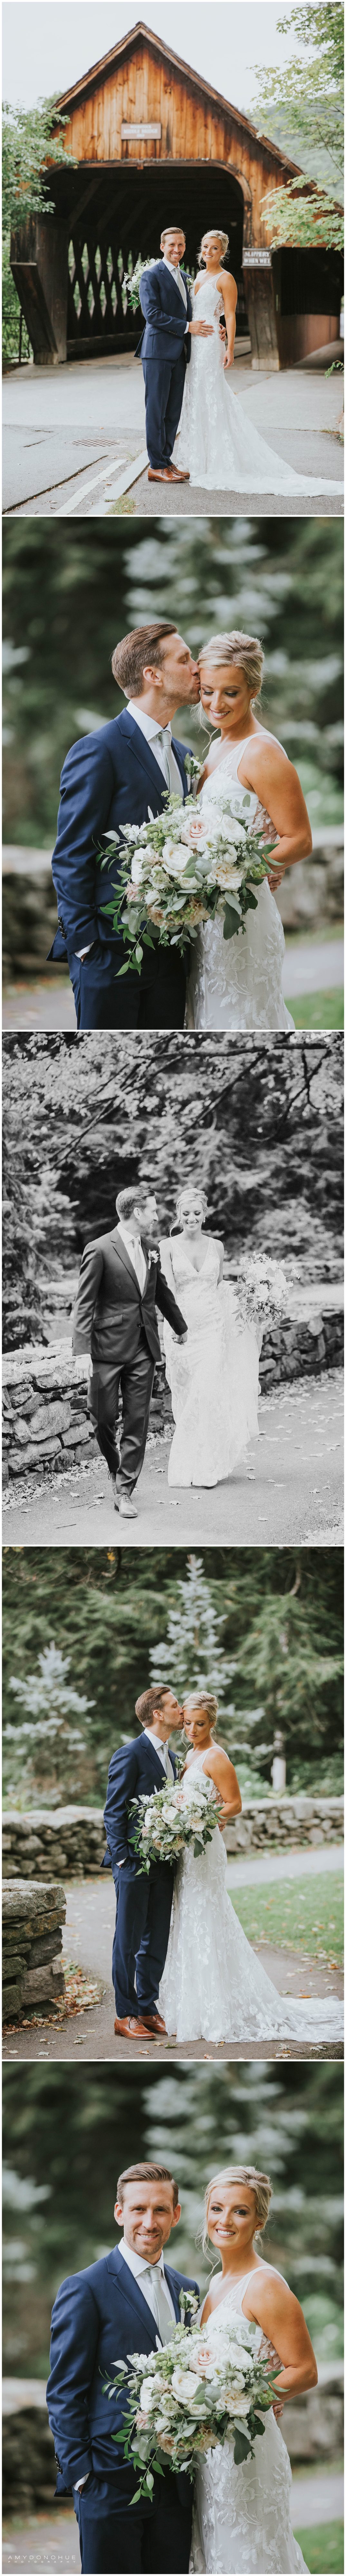 Bride and Groom Portraits | Woodstock, Vermont Wedding Photographer | © Amy Donohue Photography